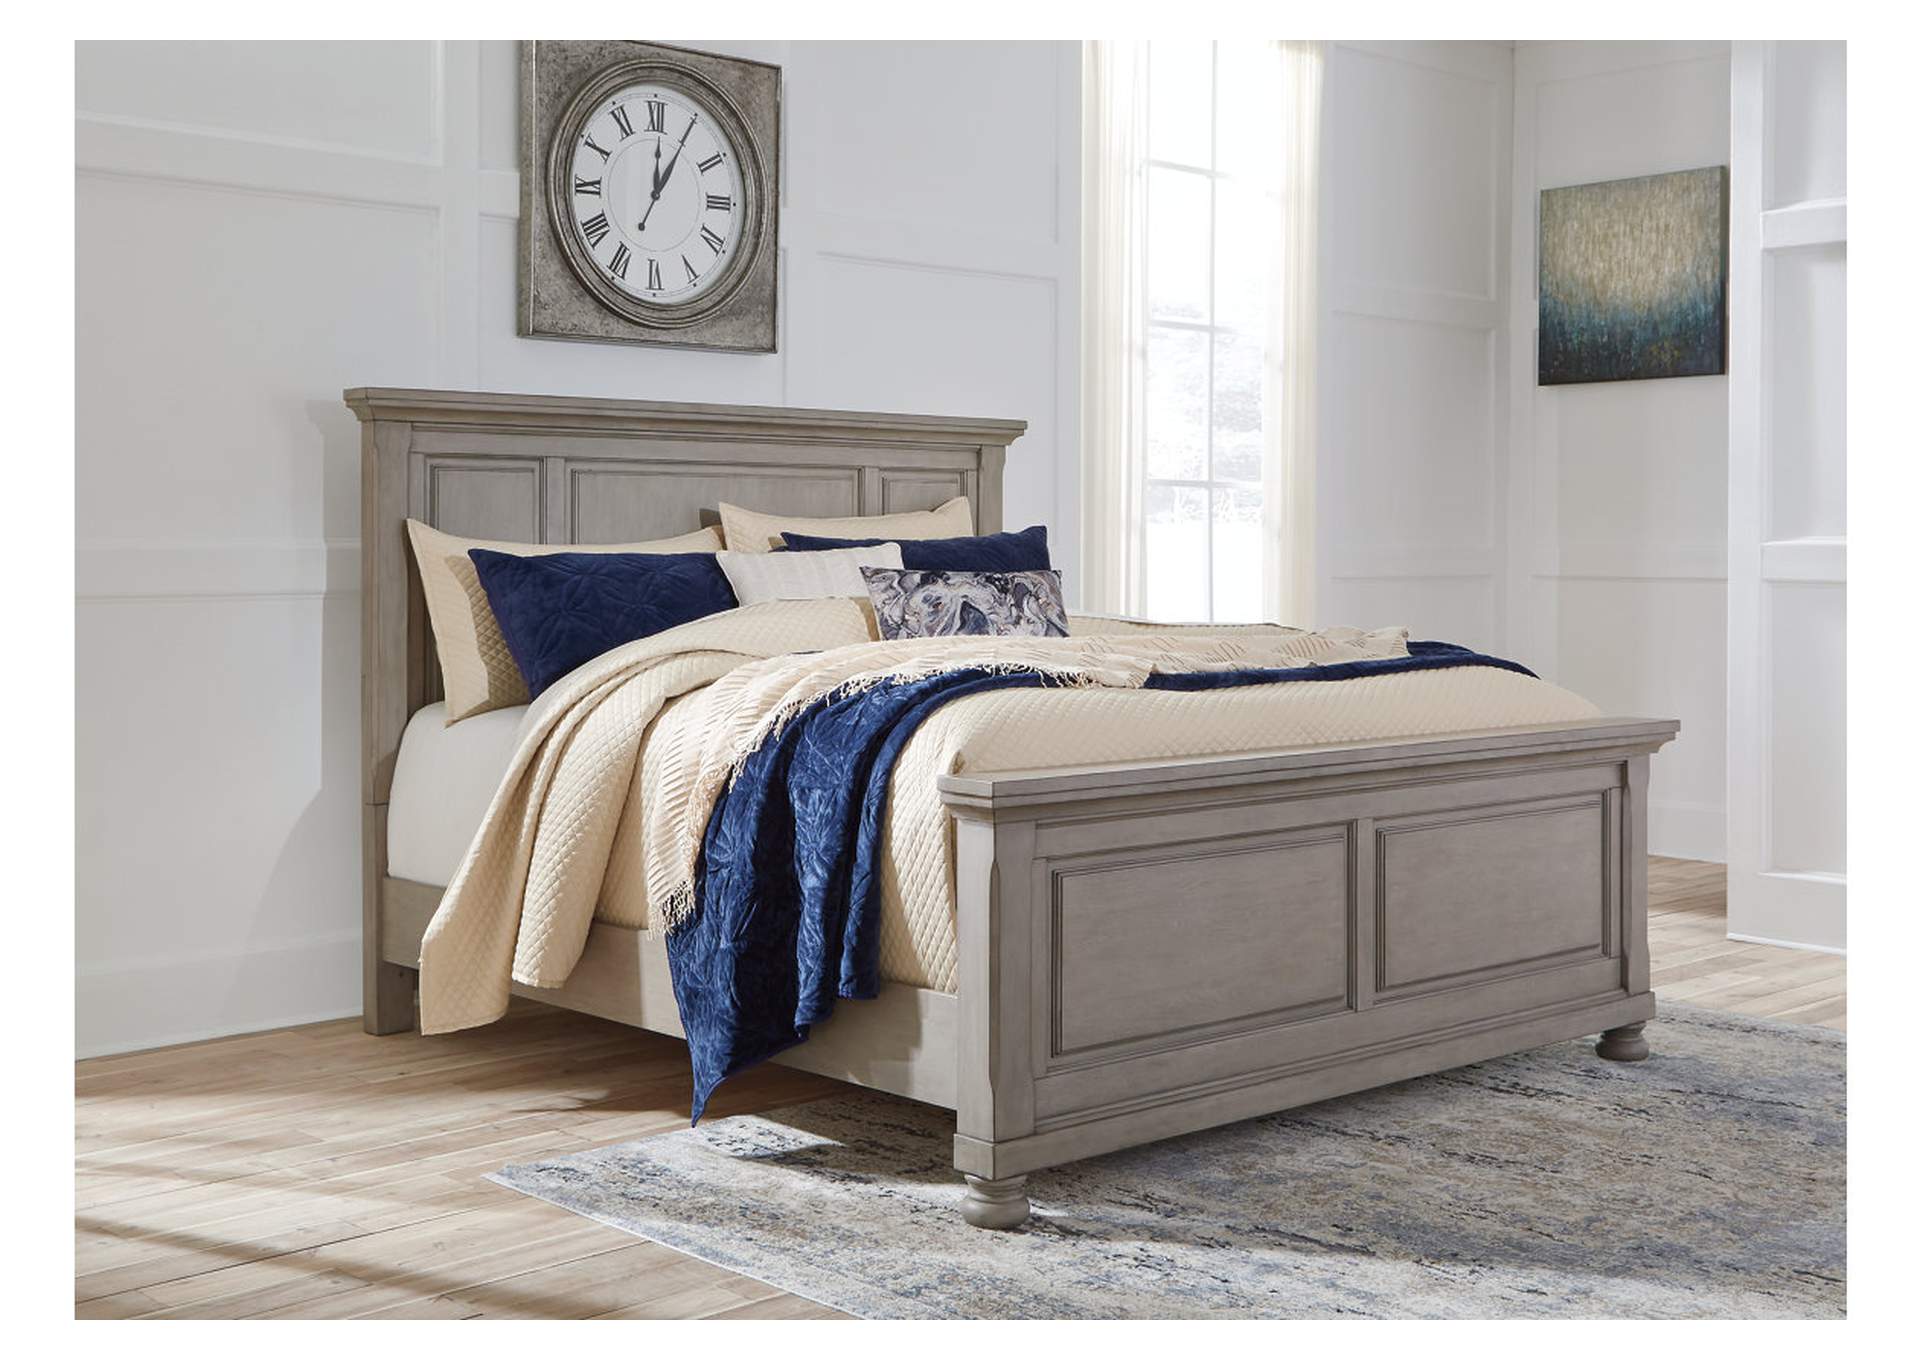 Lettner Queen Panel Bed, Dresser, and Nightstand,Signature Design By Ashley